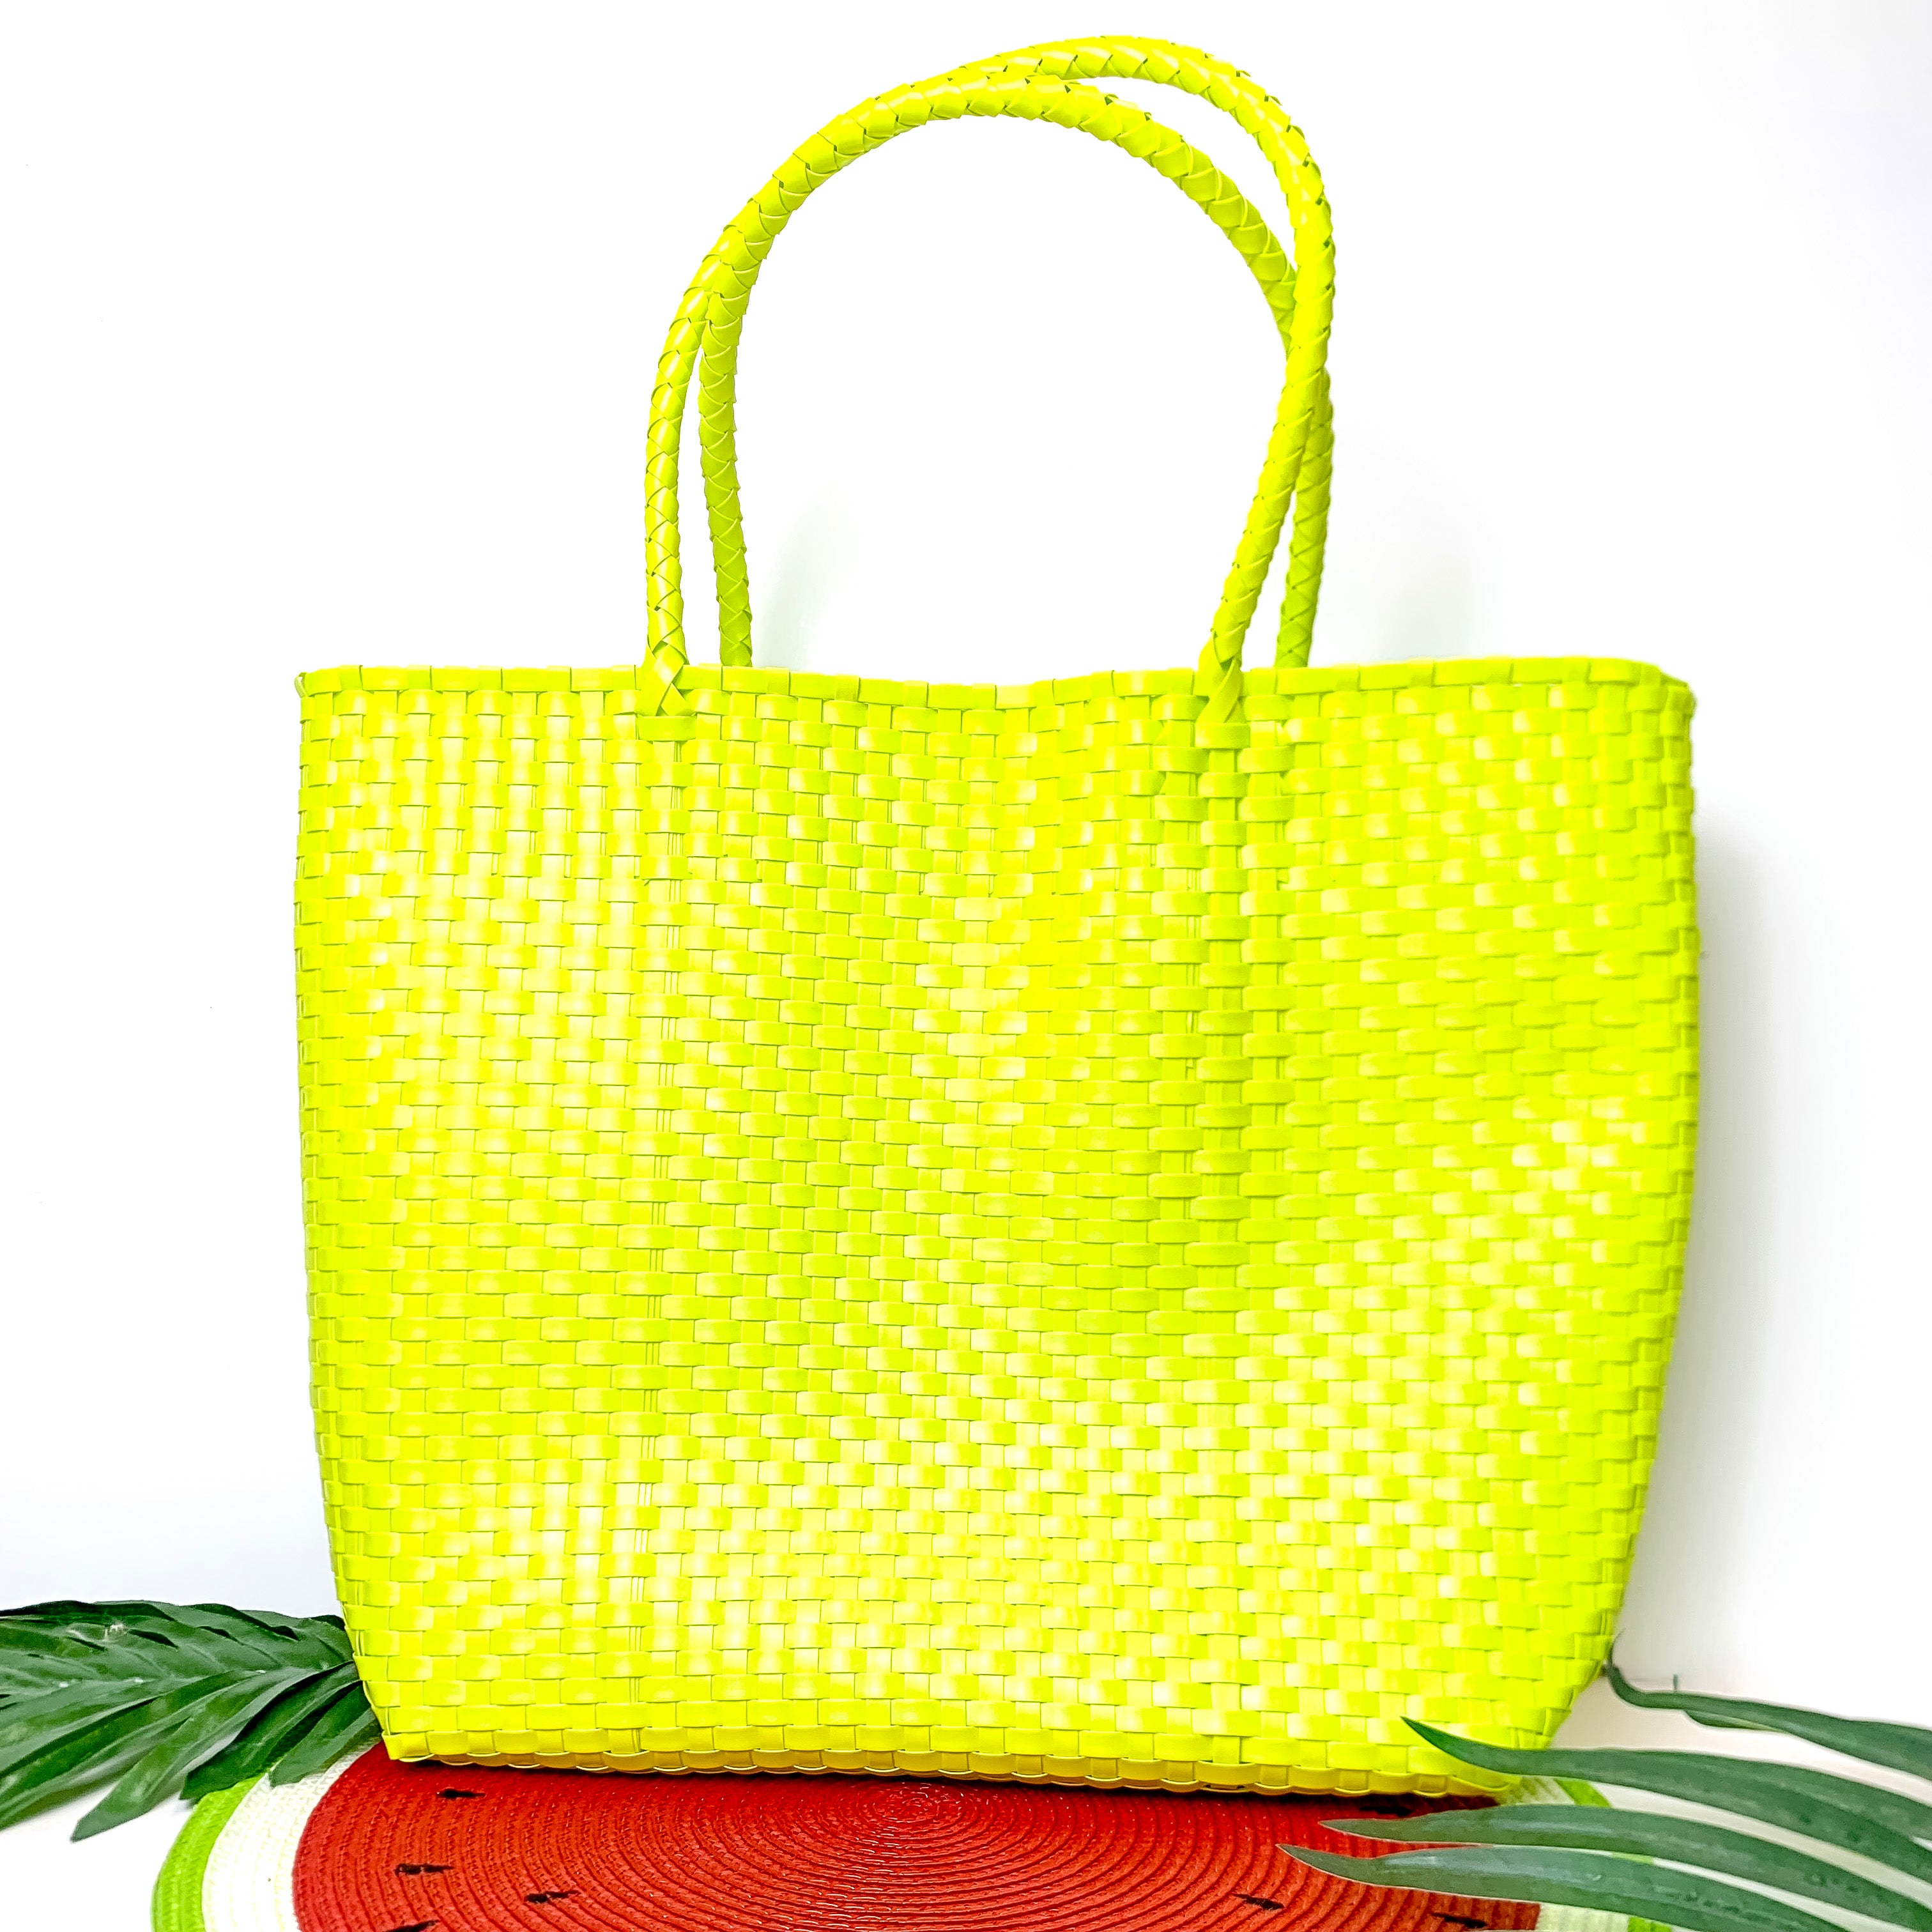 Coastal Couture Carryall Tote Bag in Neon Yellow - Giddy Up Glamour Boutique